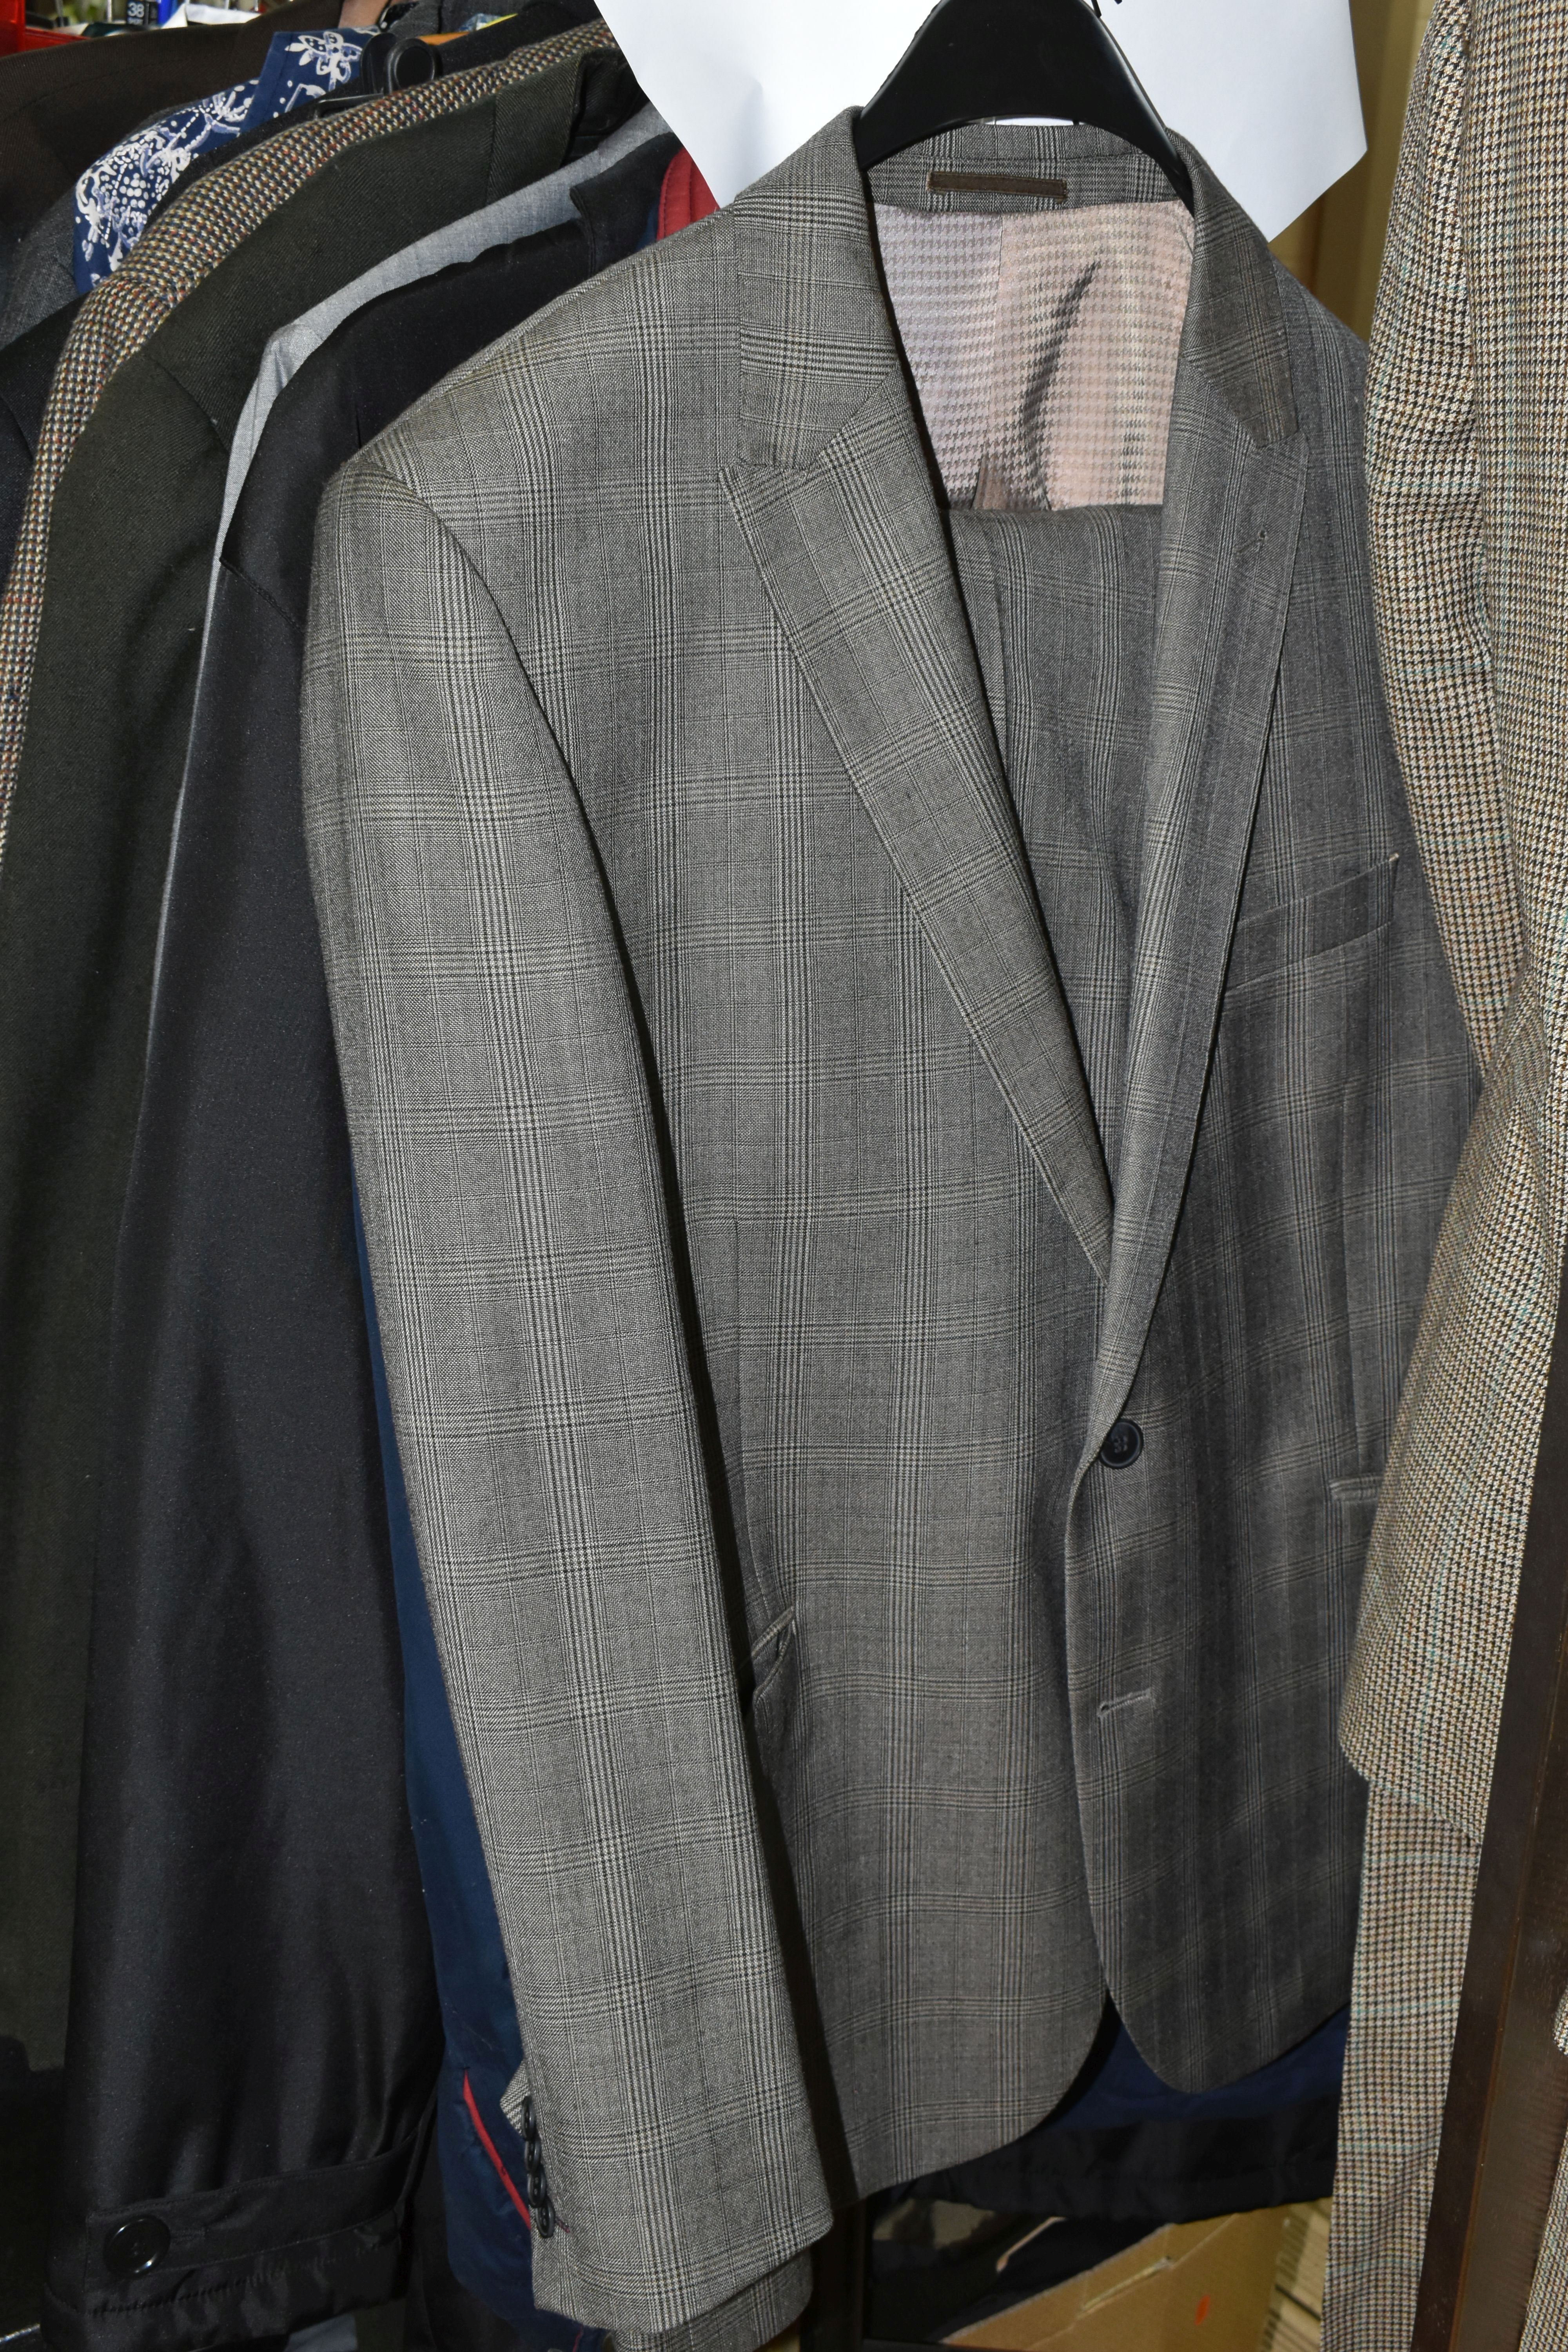 A LARGE QUANTITY OF GENTLEMEN'S CLOTHING AND ACCESSORIES, to include eight suits, rain jackets, - Image 6 of 19